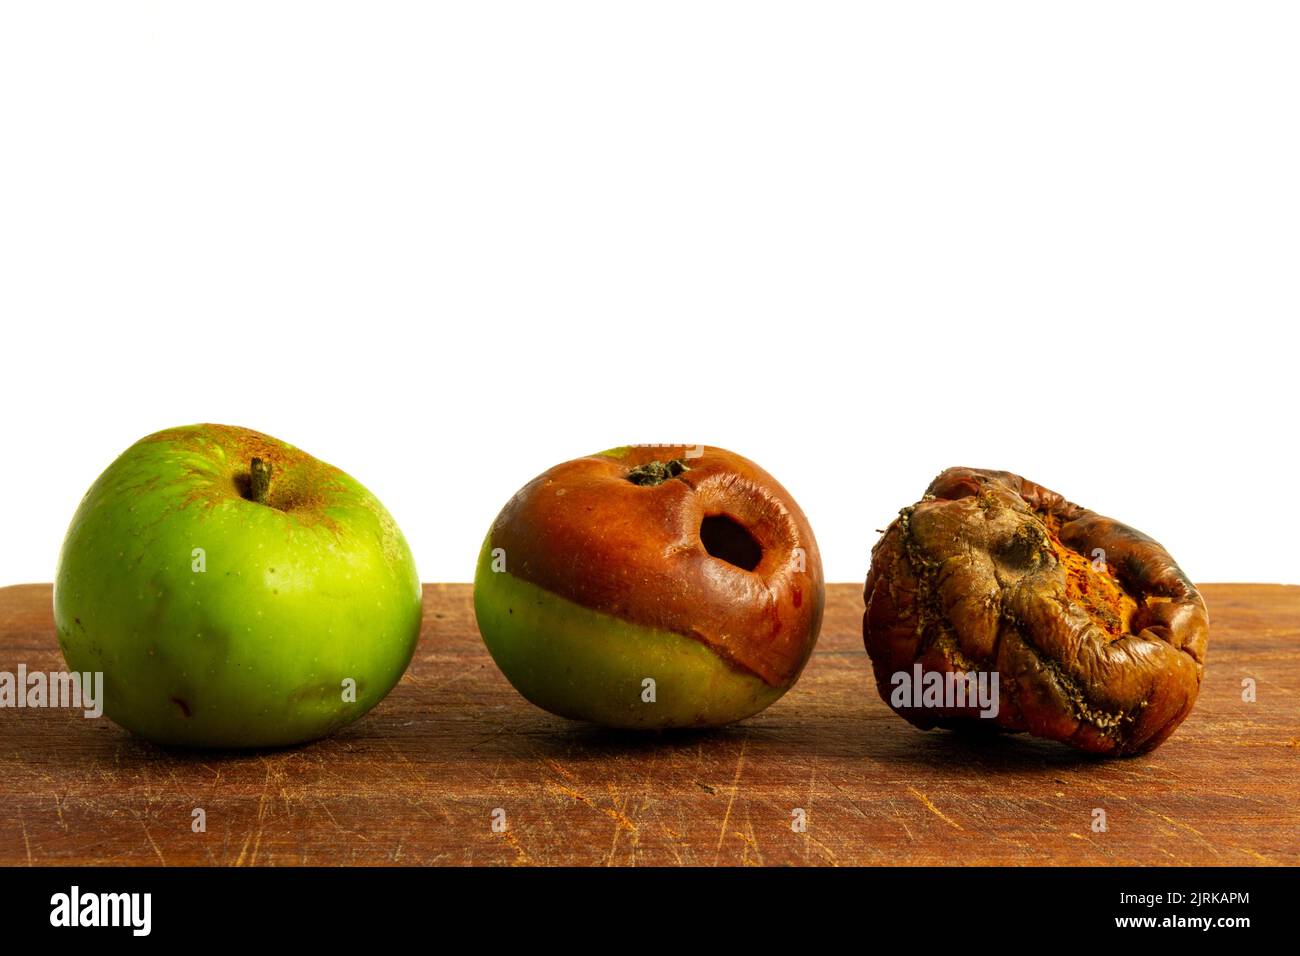 Three apples lined up on a wooden board against a white background, each of them in an increasing state of decay Stock Photo